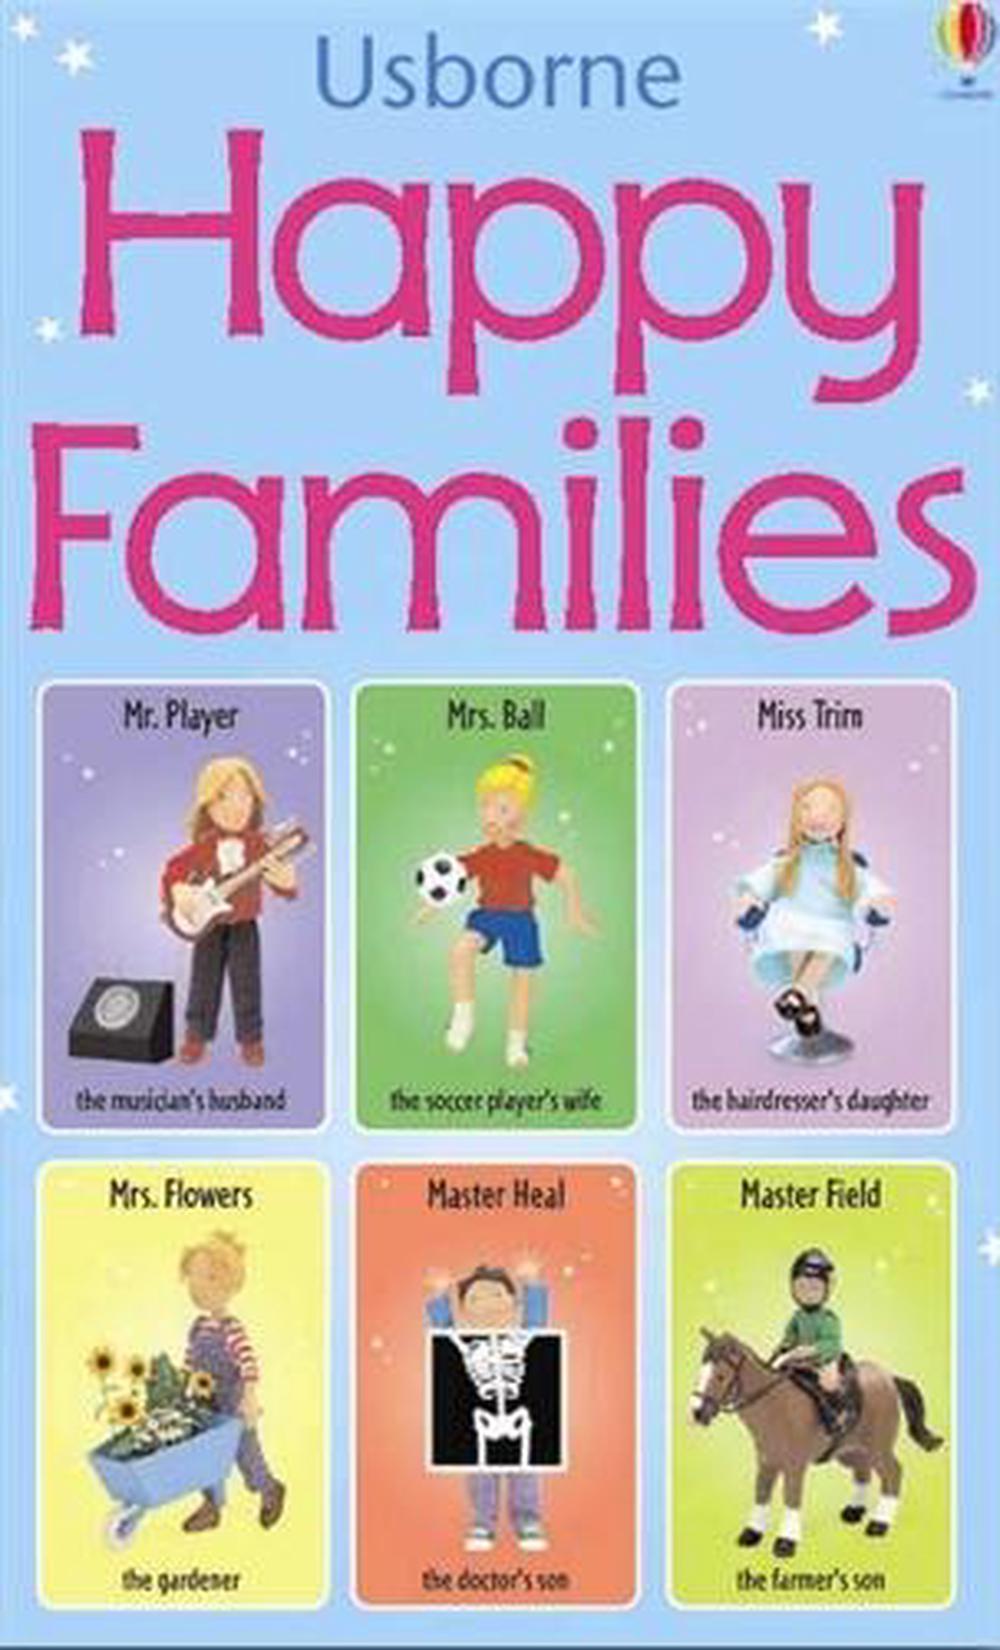 happy-families-card-game-by-jo-litchfield-english-novelty-book-free-shipping-9780746060117-ebay